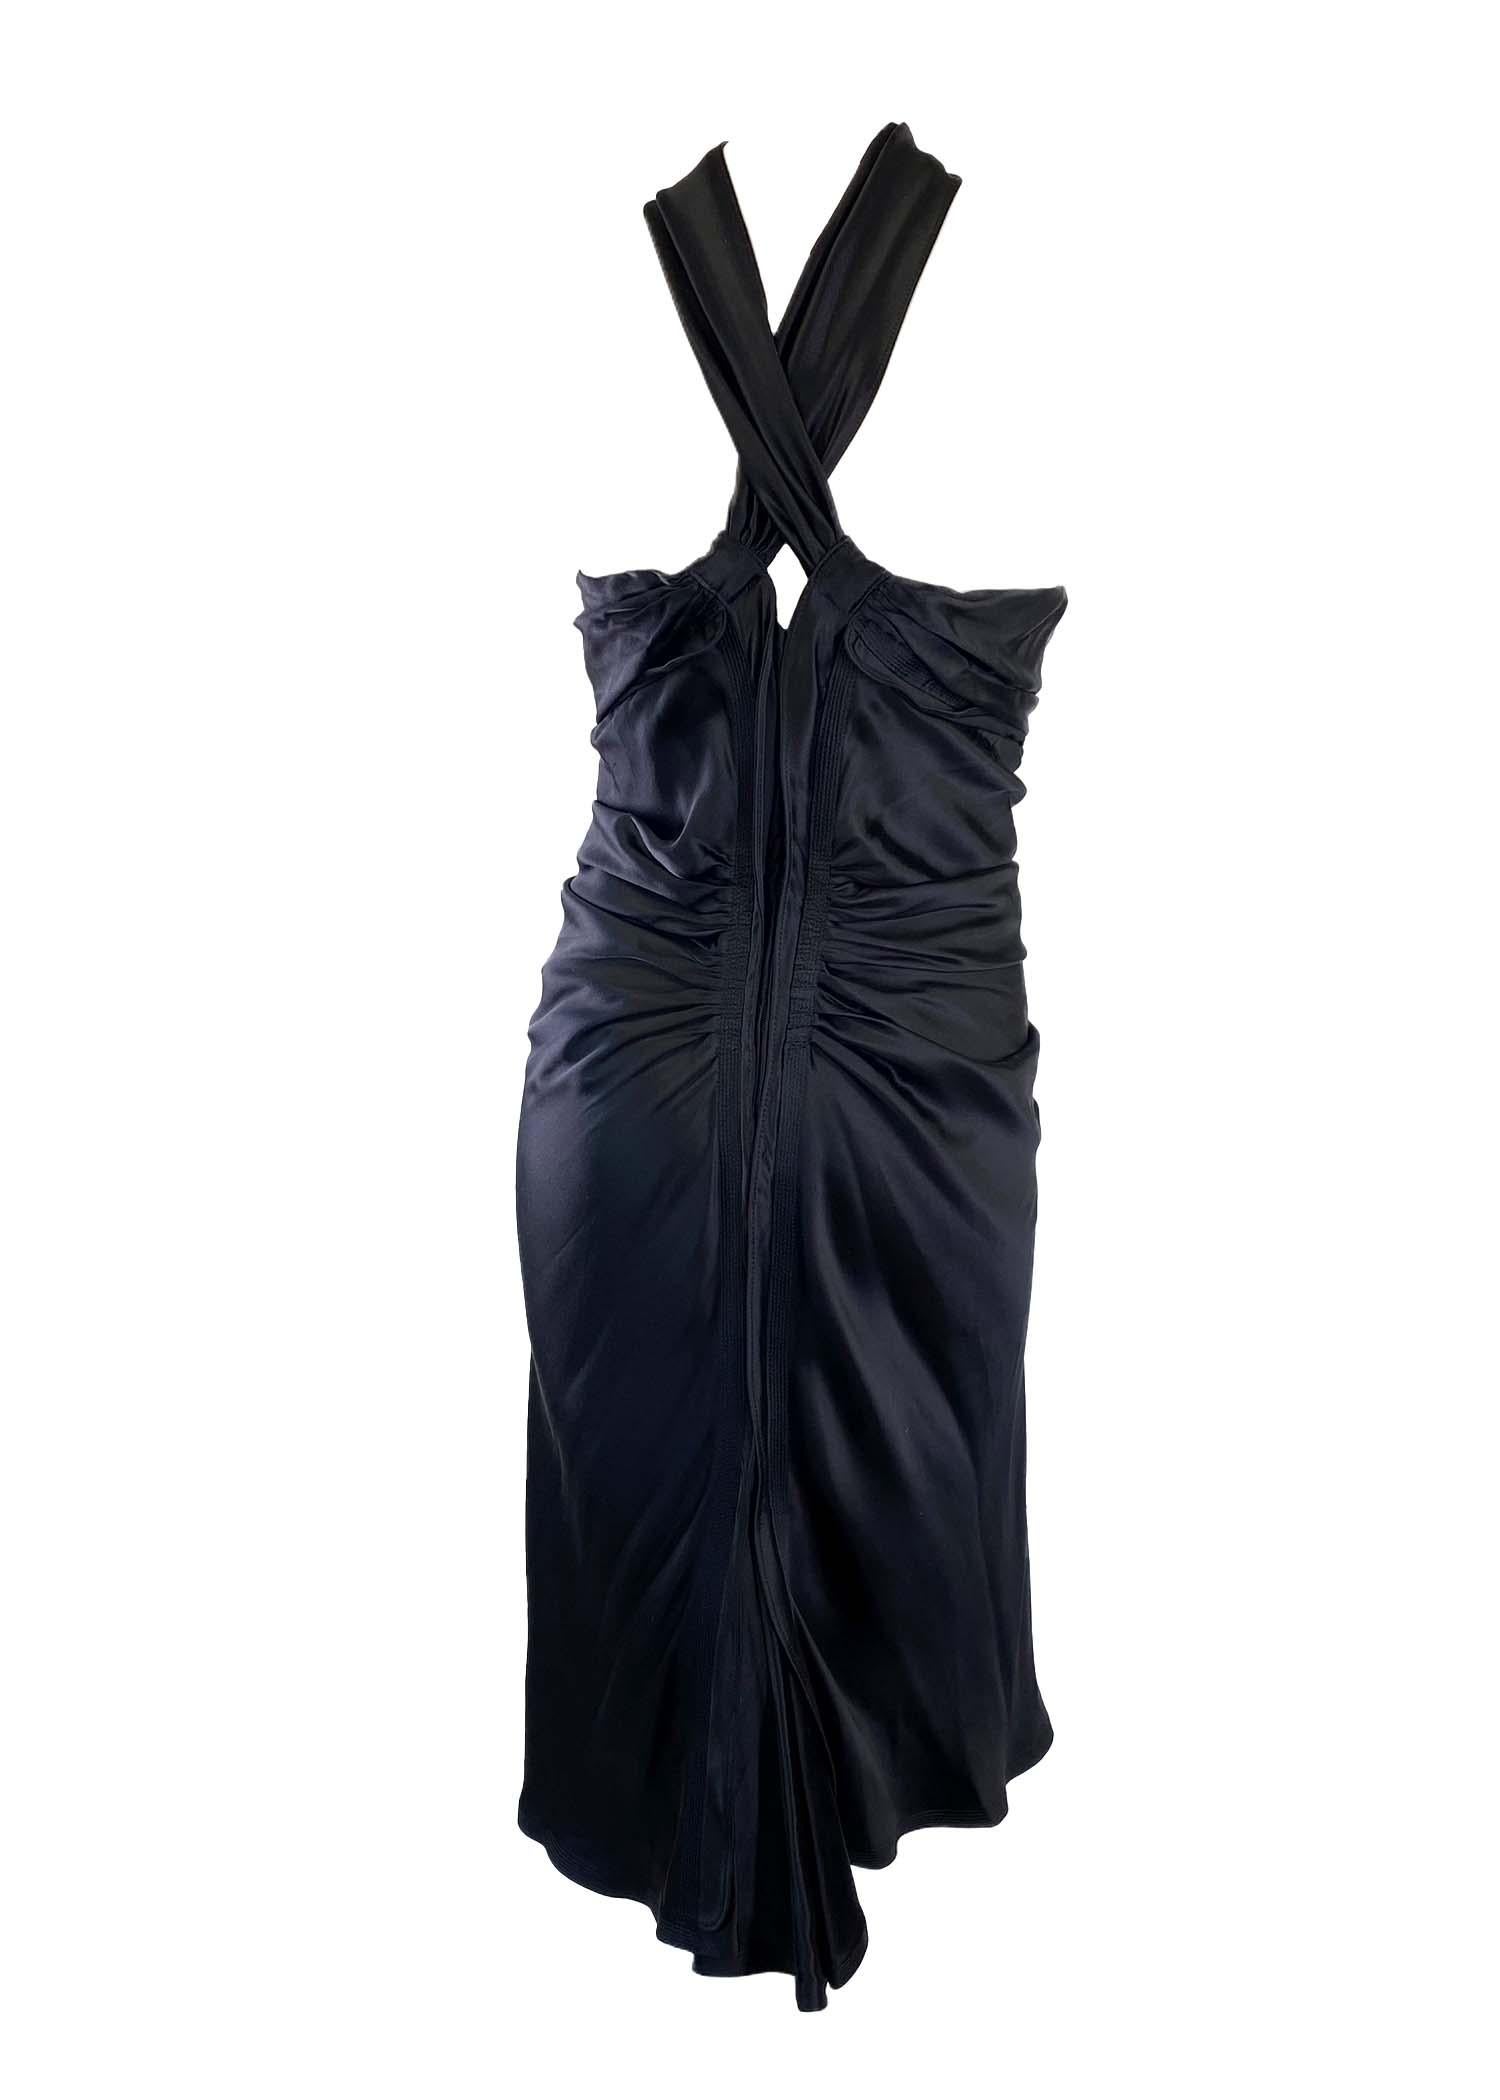 F/W 2003 Yves Saint Laurent by Tom Ford Black Silk Ruched Ruffle Cocktail Dress For Sale 3